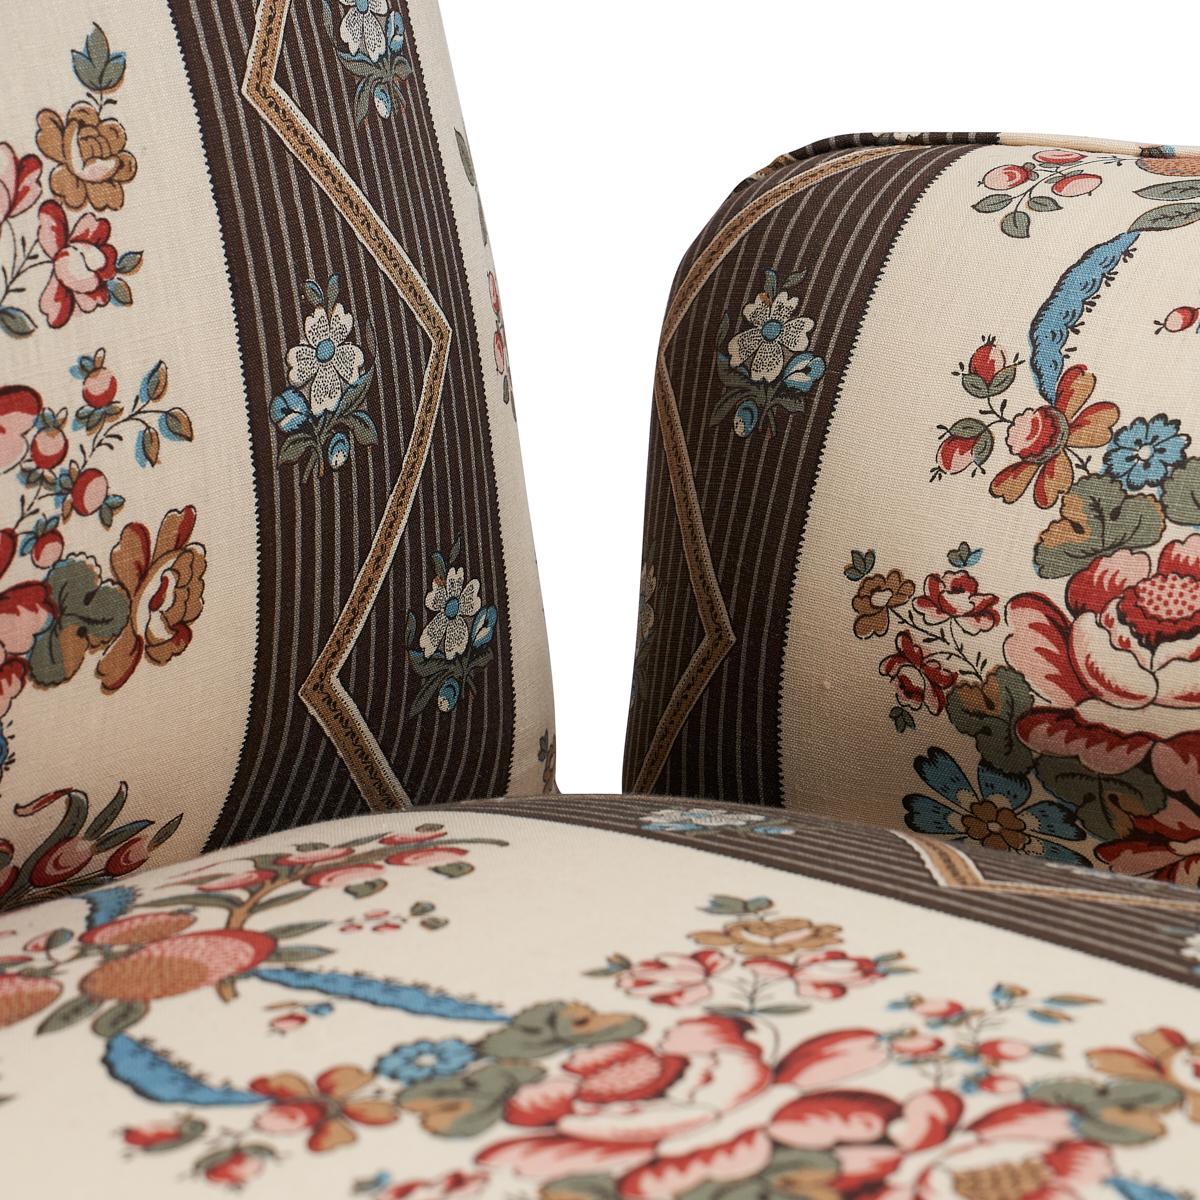 Mid-19th Century Pair of Small Chairs, 1830s France, Newly Reupholstered Fabric